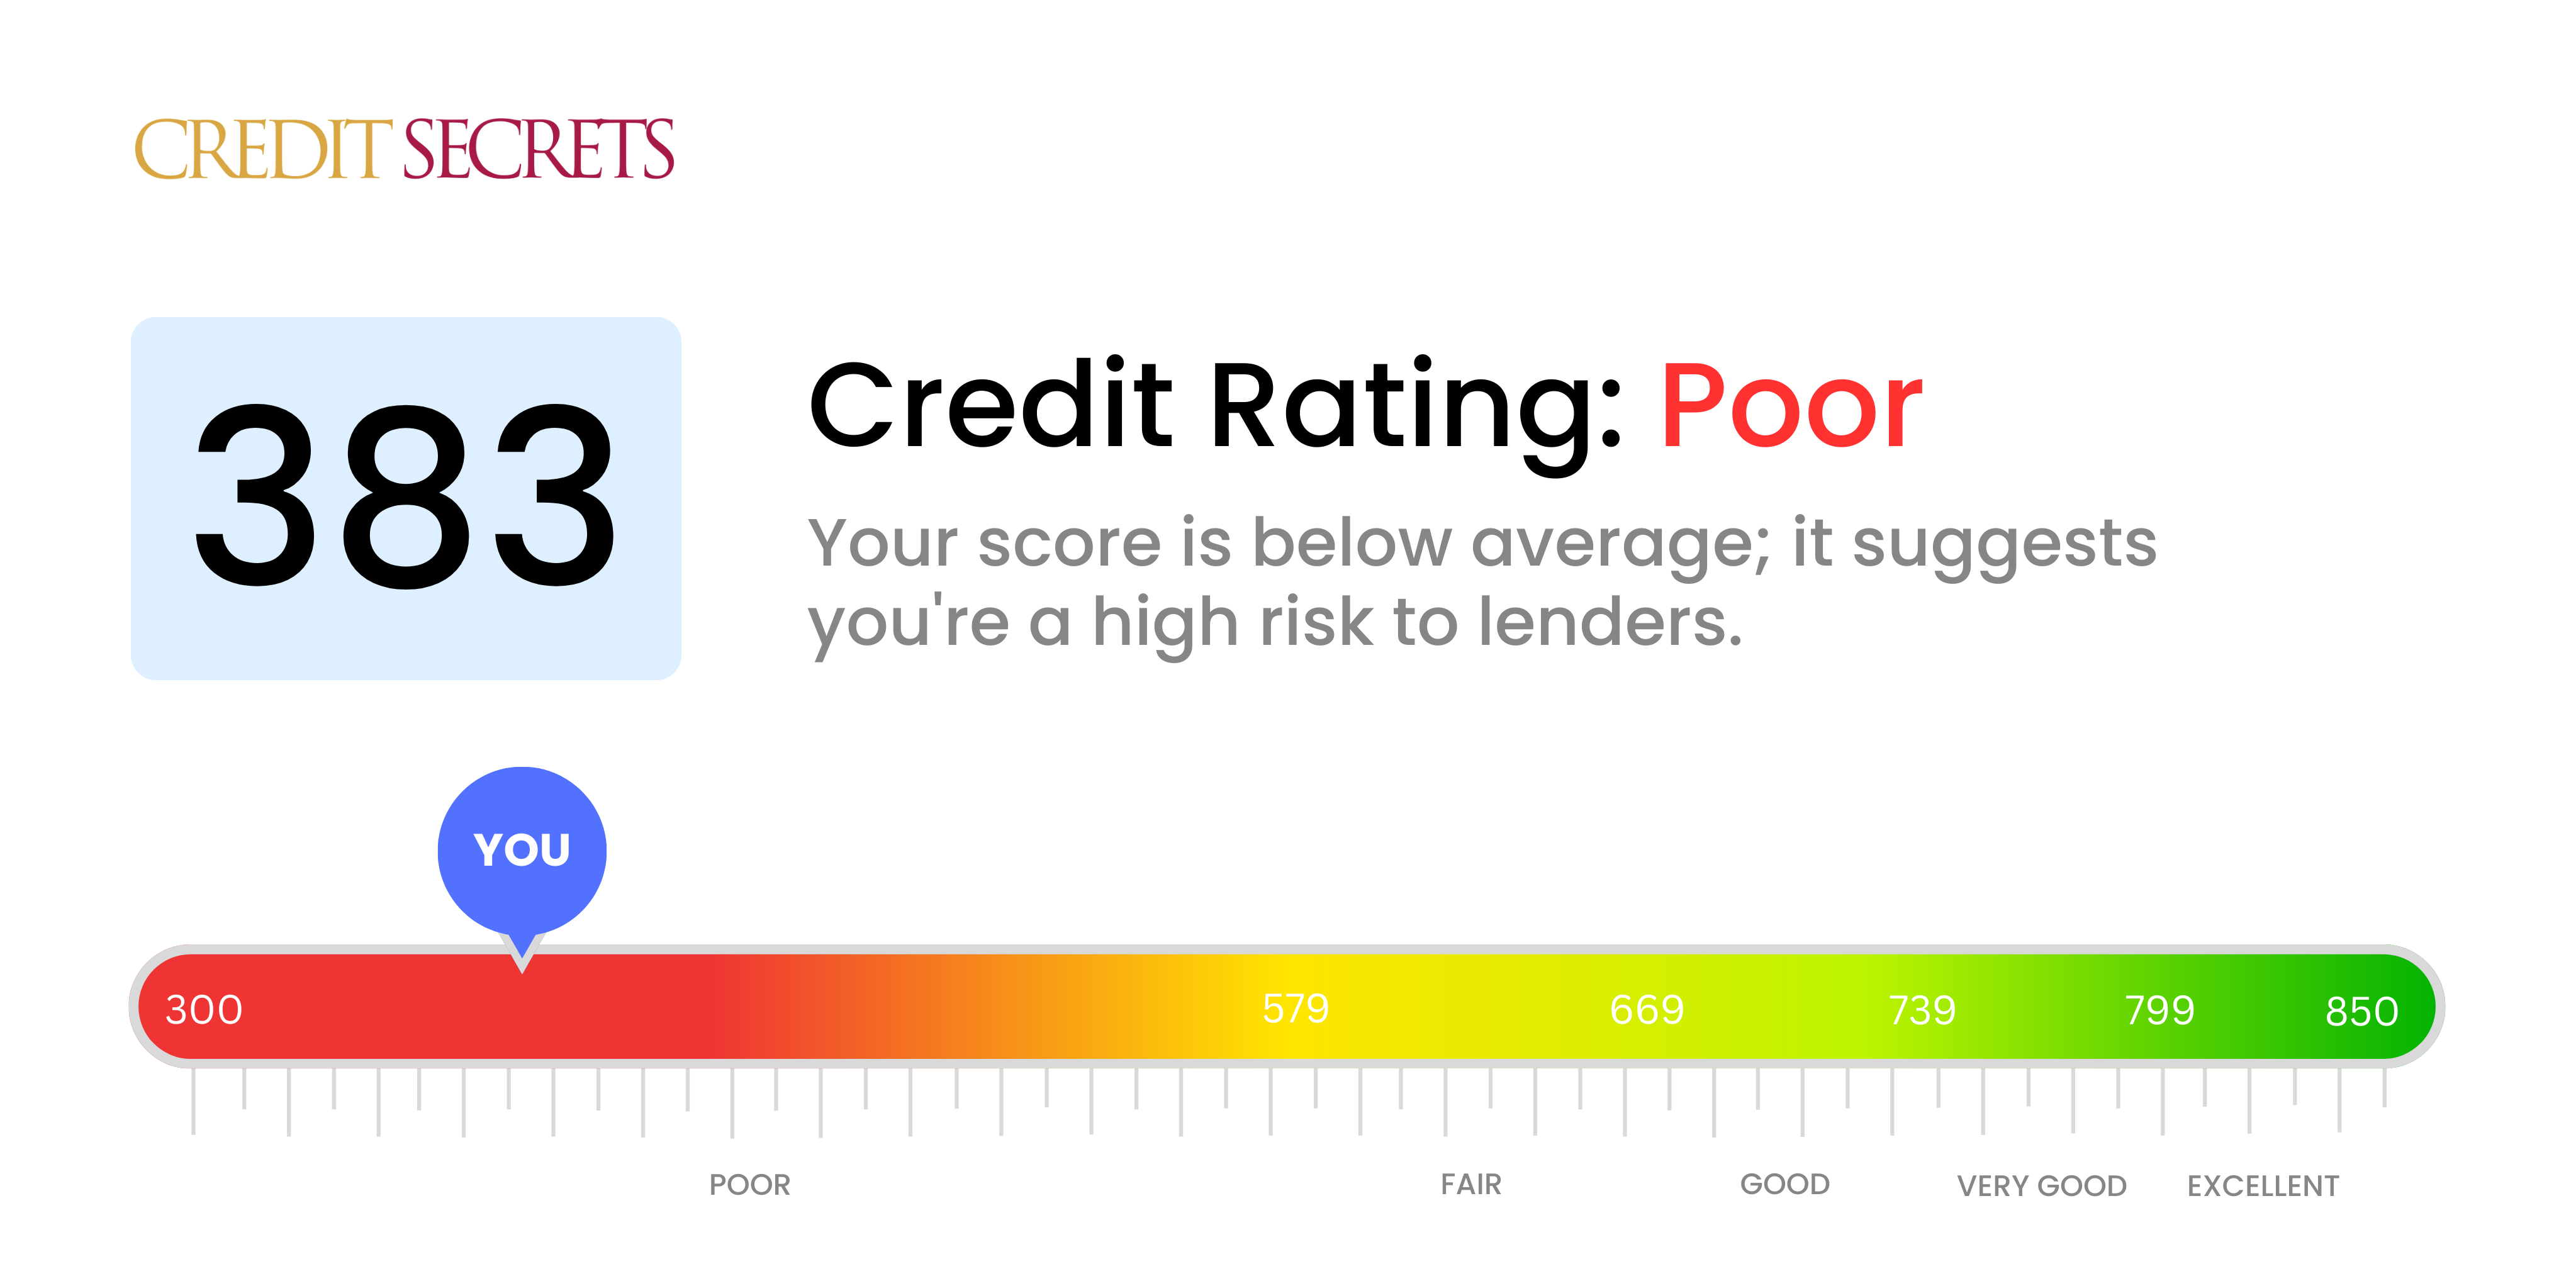 Is 383 a good credit score?